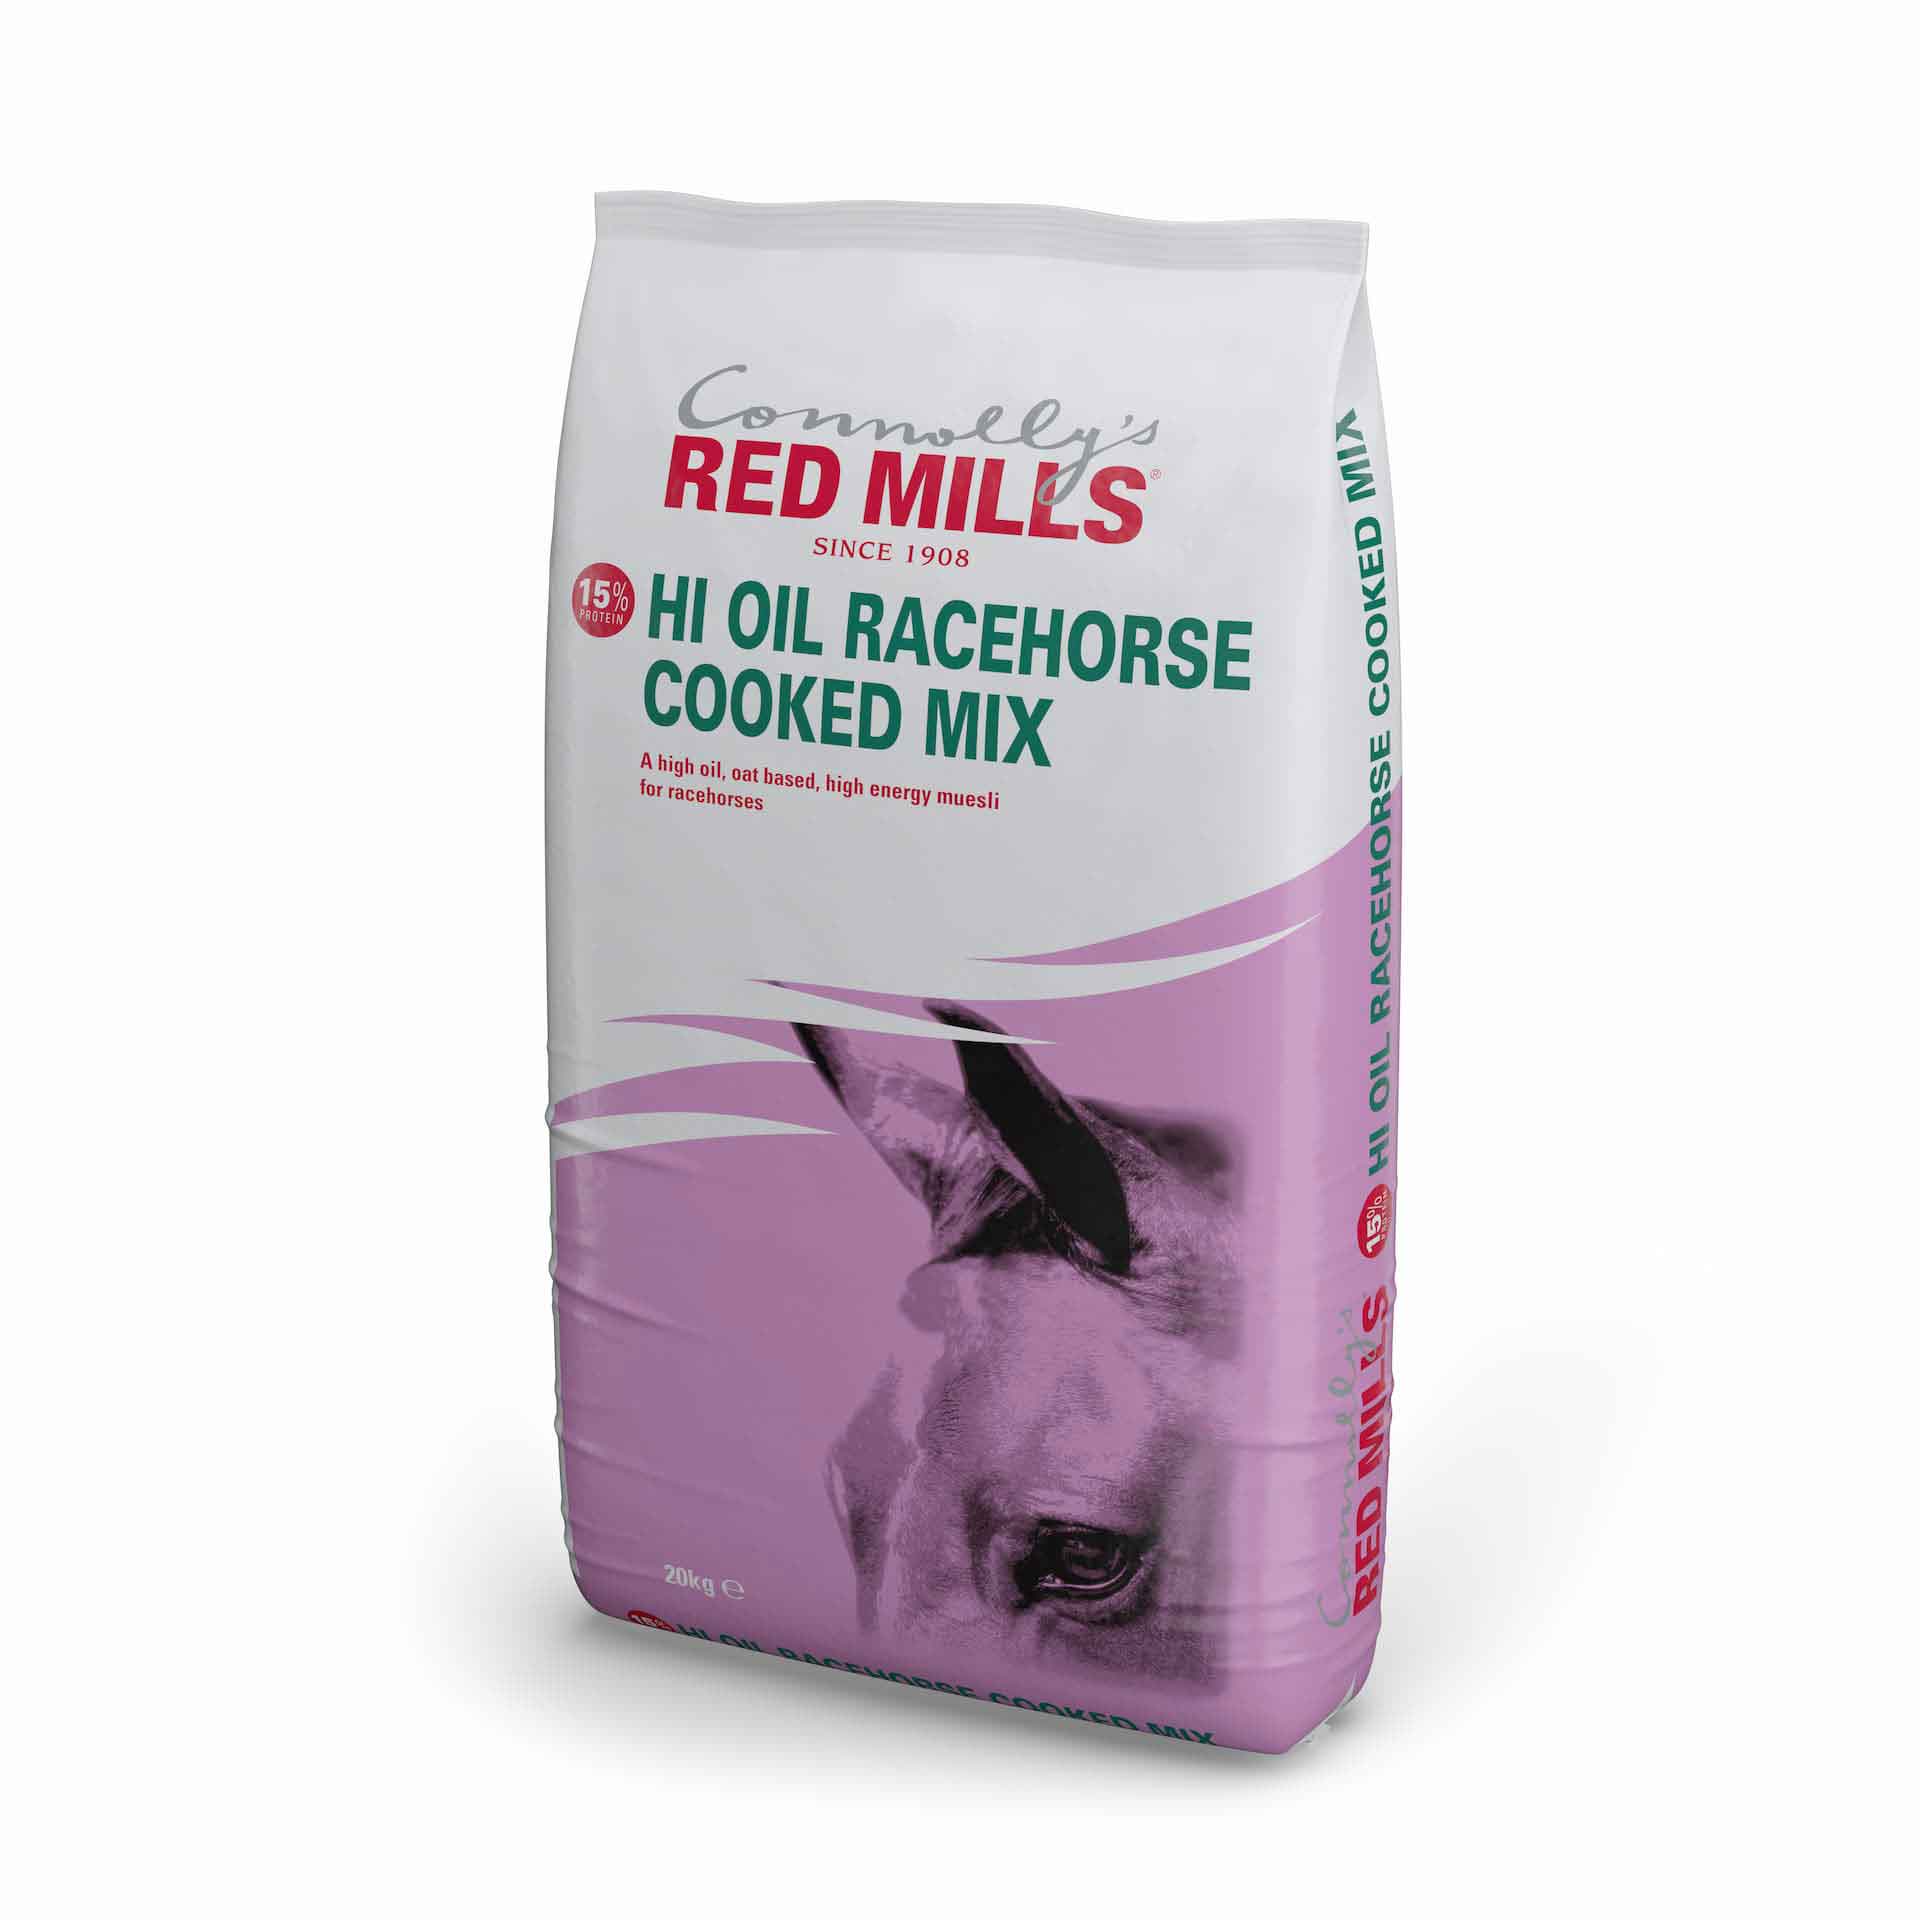 Hi-Oil Racehorse Cooked Mix